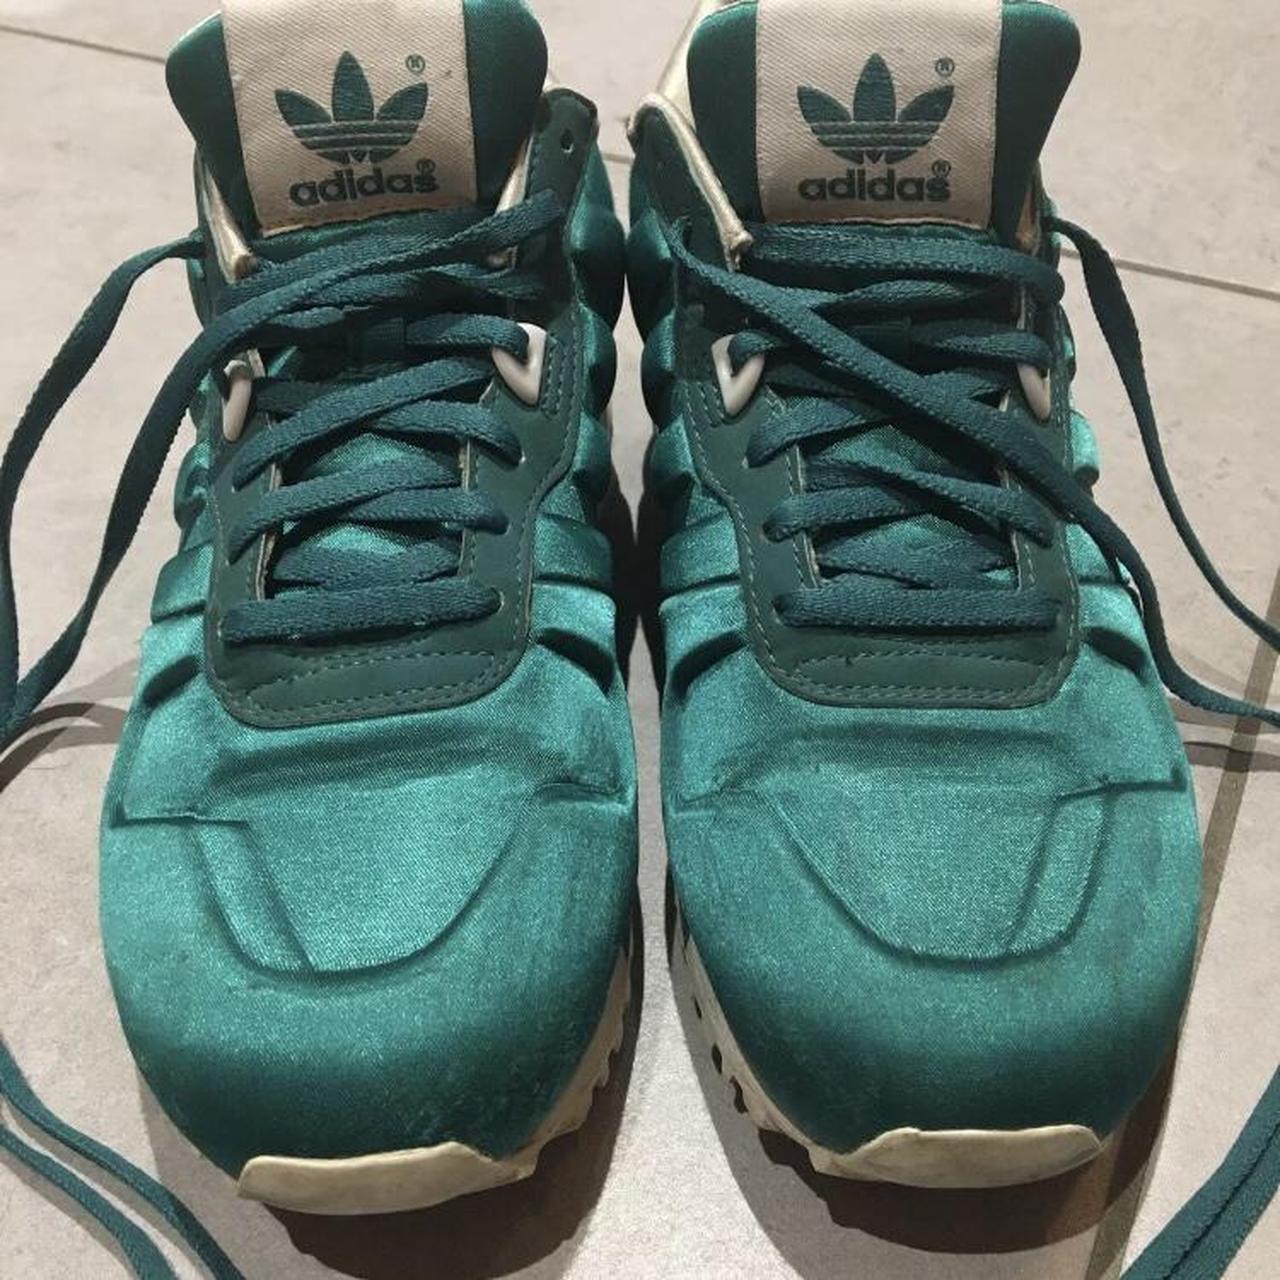 Vintage Adidas ZX 700 Shoes G95957 jade green